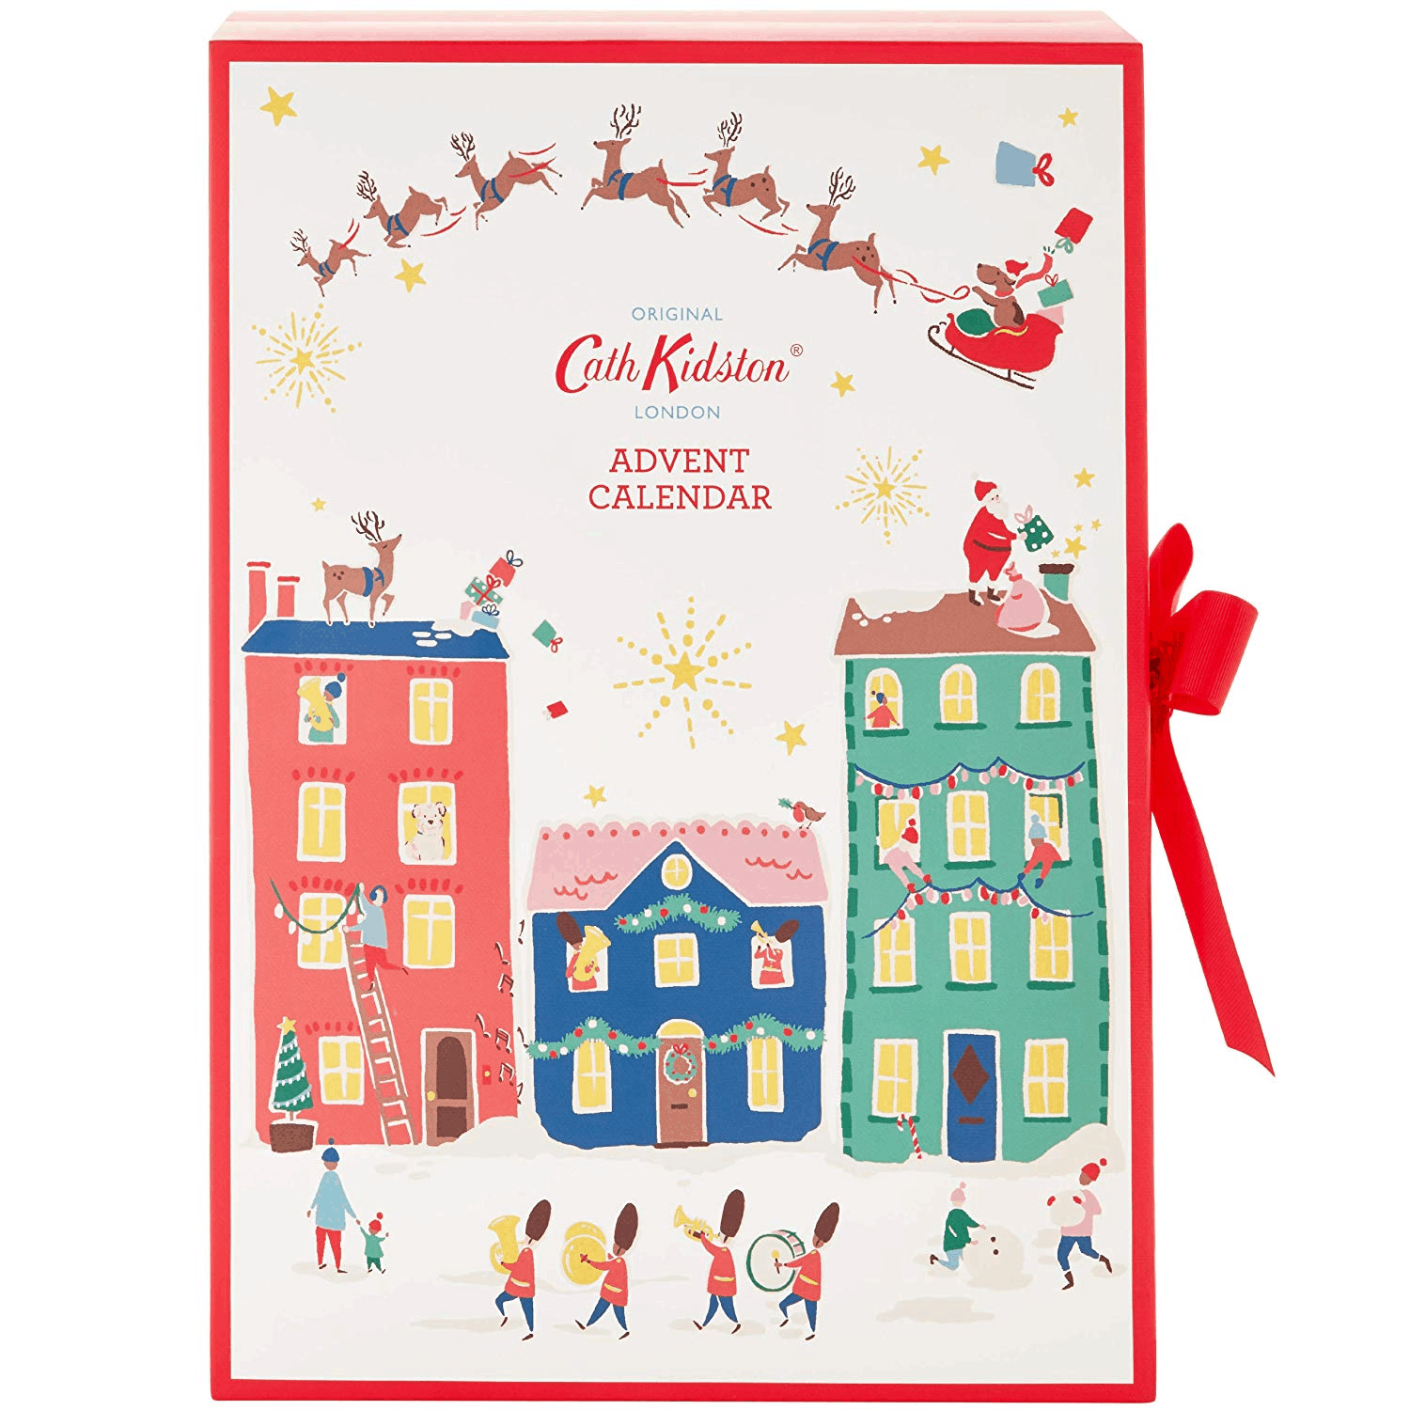 Cath Kidston Advent Calendar 2019 Available Now + Full Spoilers